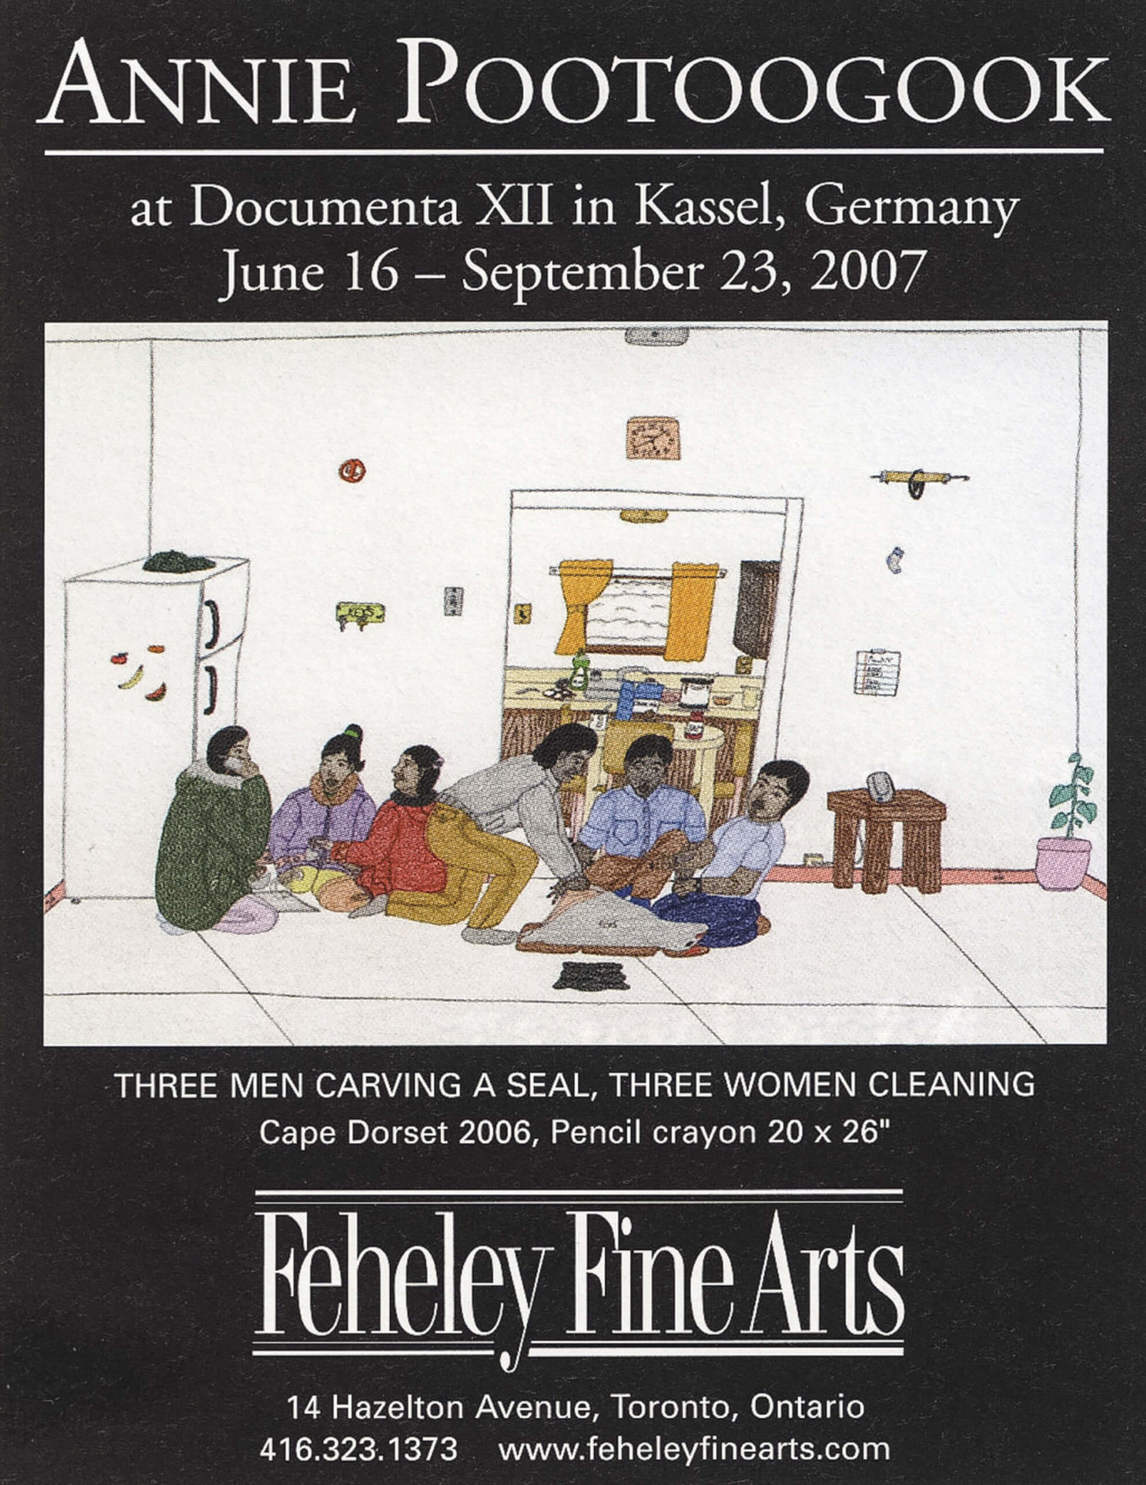 Promotional poster by Feheley Fine Arts for Annie Pootoogook at documenta 12